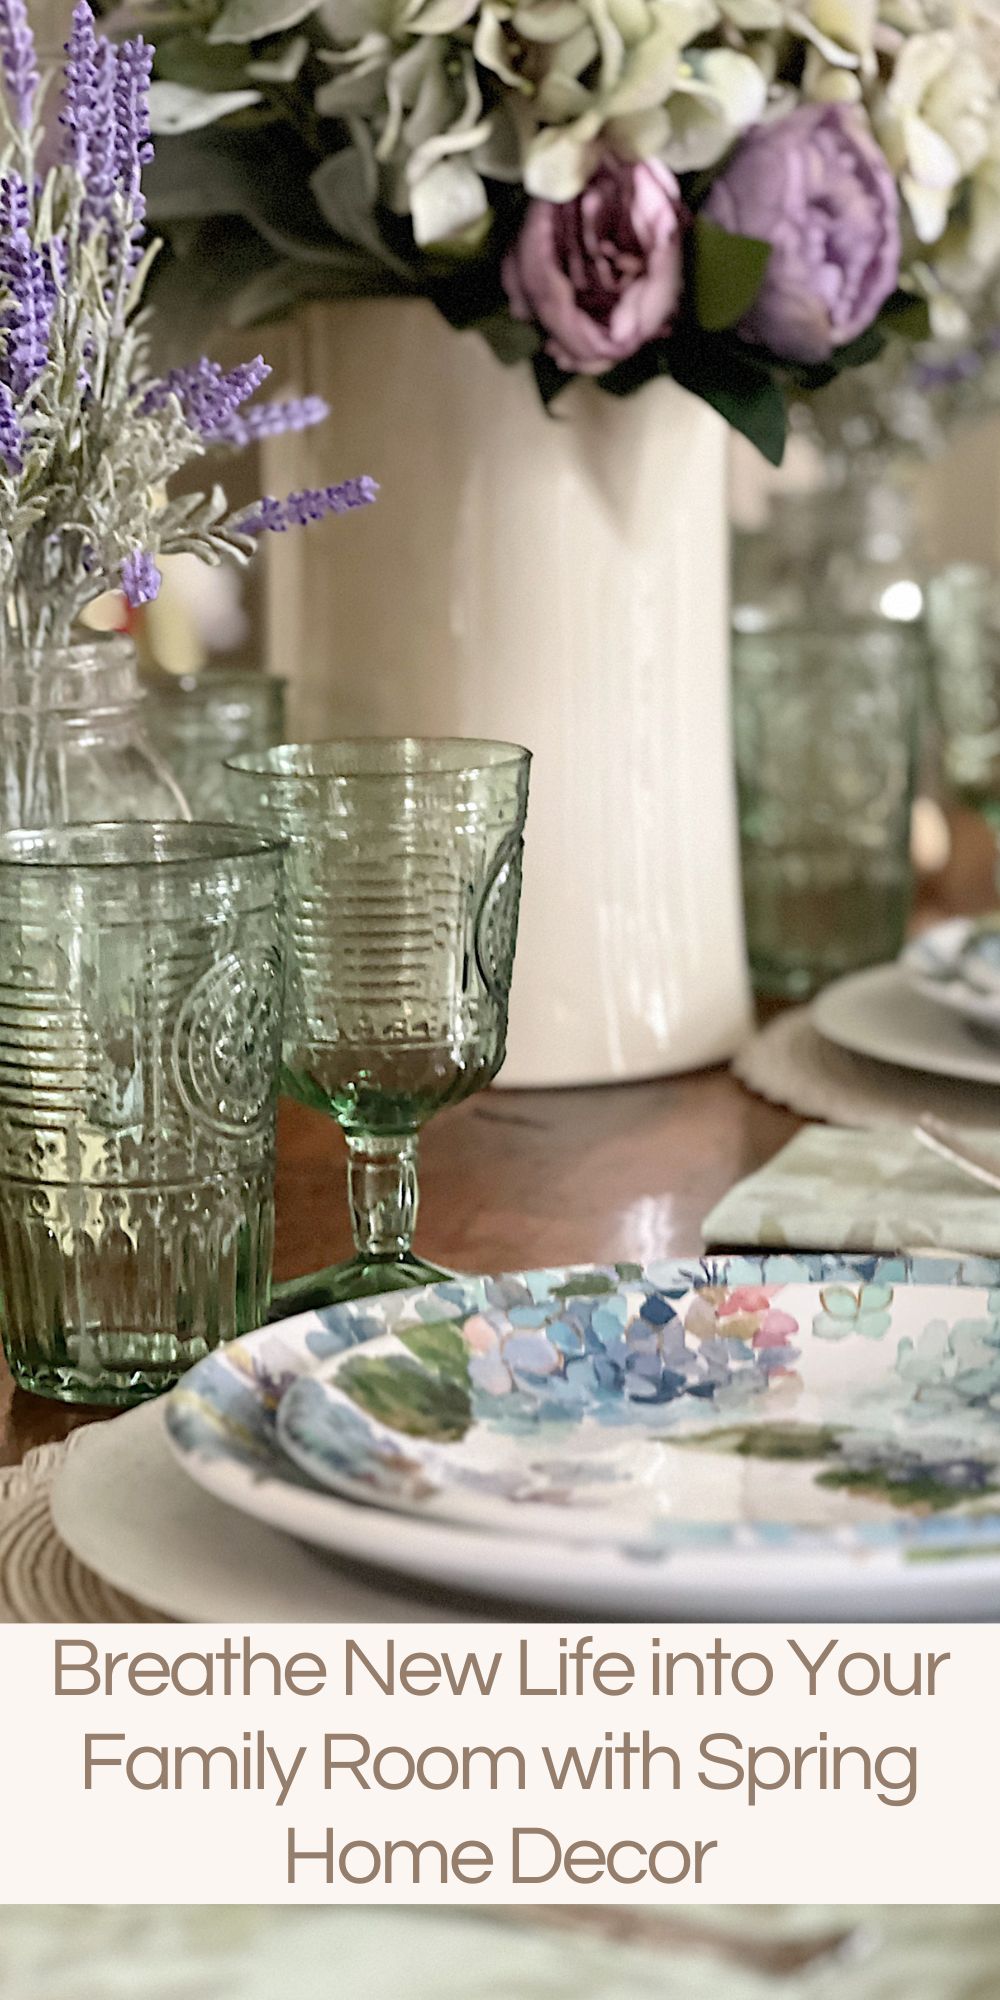 As winter recedes and we begin to see the colors and warmth of spring, it's time to refresh your living space with spring home decor.